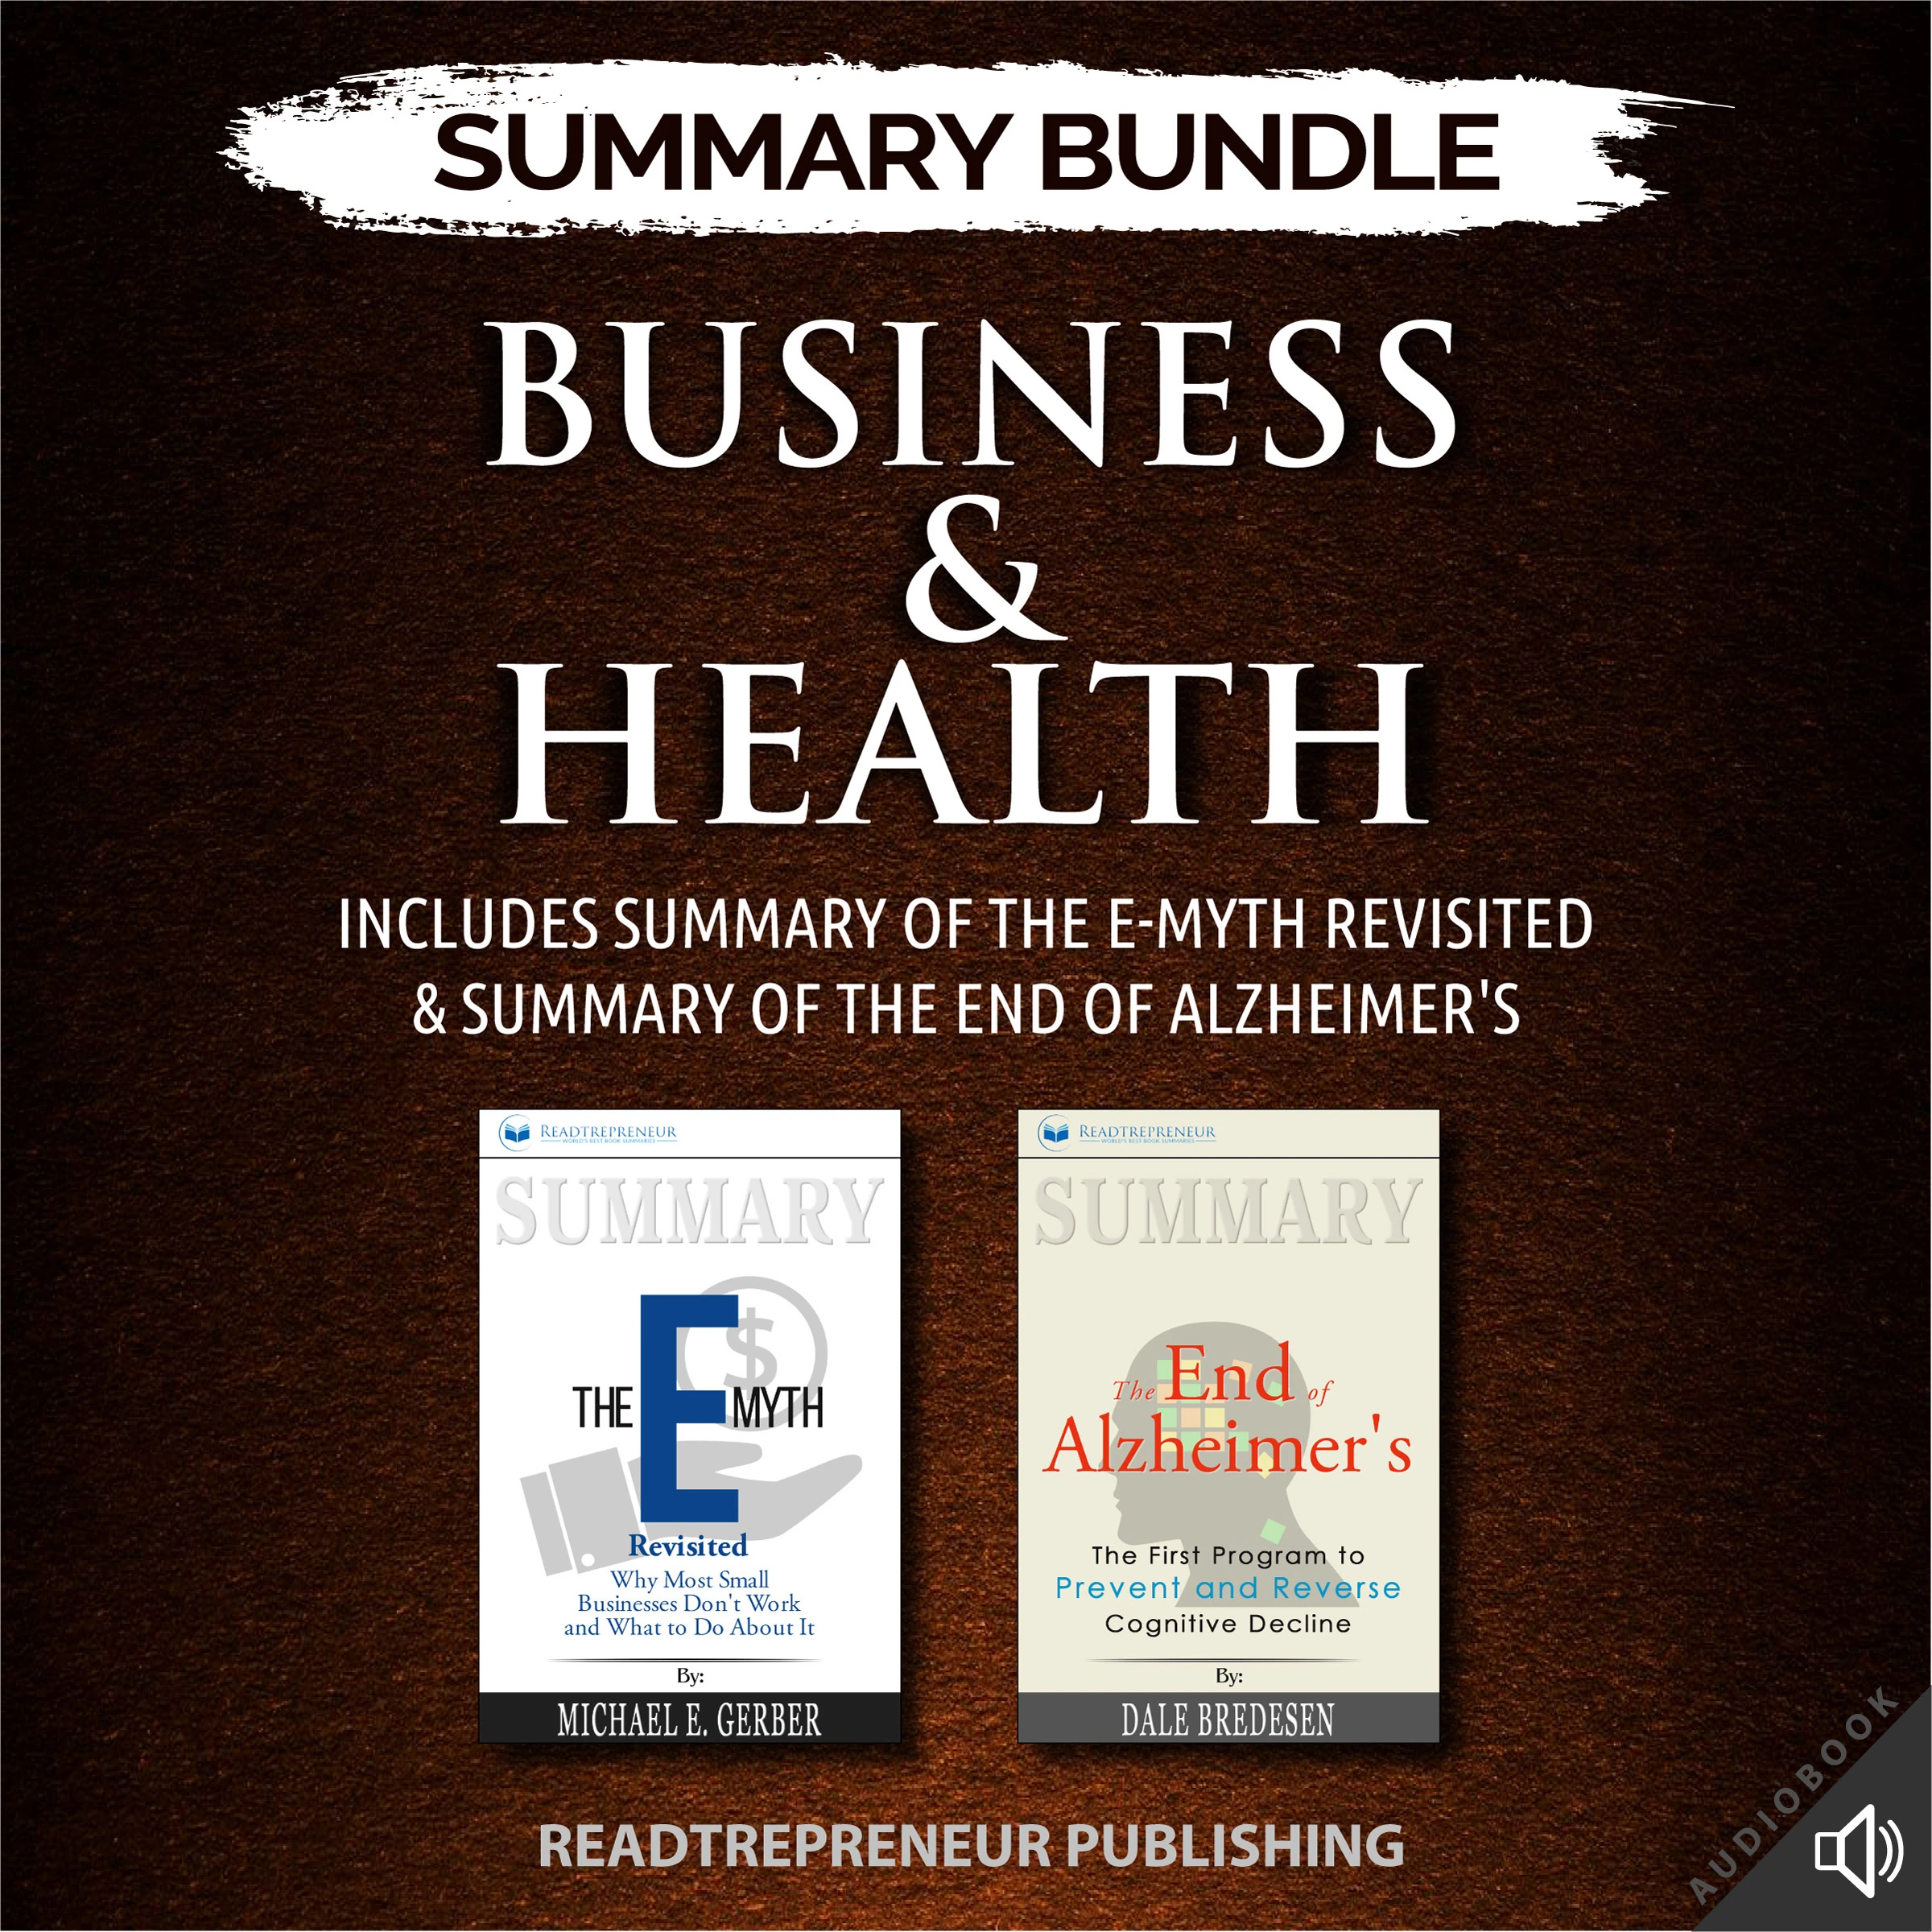 Summary Bundle: Business & Health | Readtrepreneur Publishing: Includes Summary of The E-Myth Revisited & Summary of The End of Alzheimer's Audiobook by Readtrepreneur Publishing